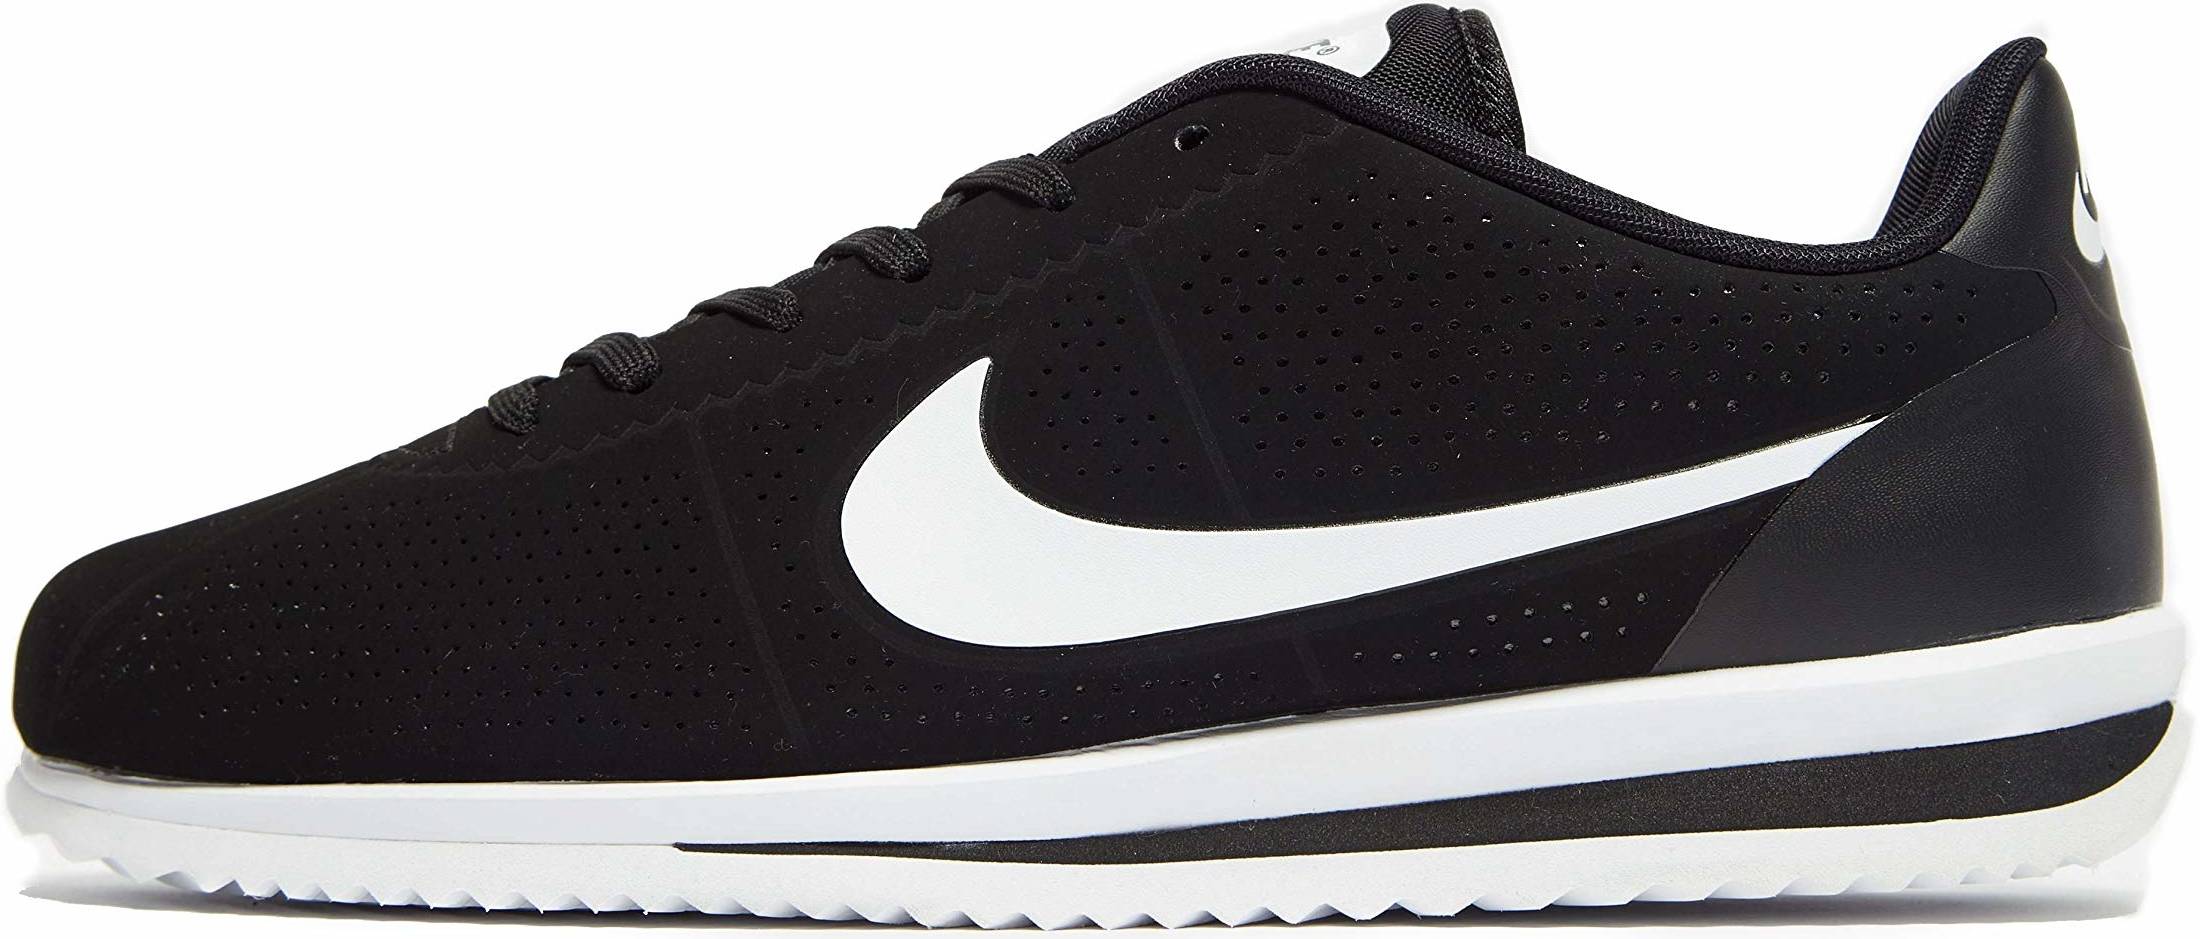 15 Reasons to/NOT to Buy Nike Cortez Ultra Moire (Oct 2021